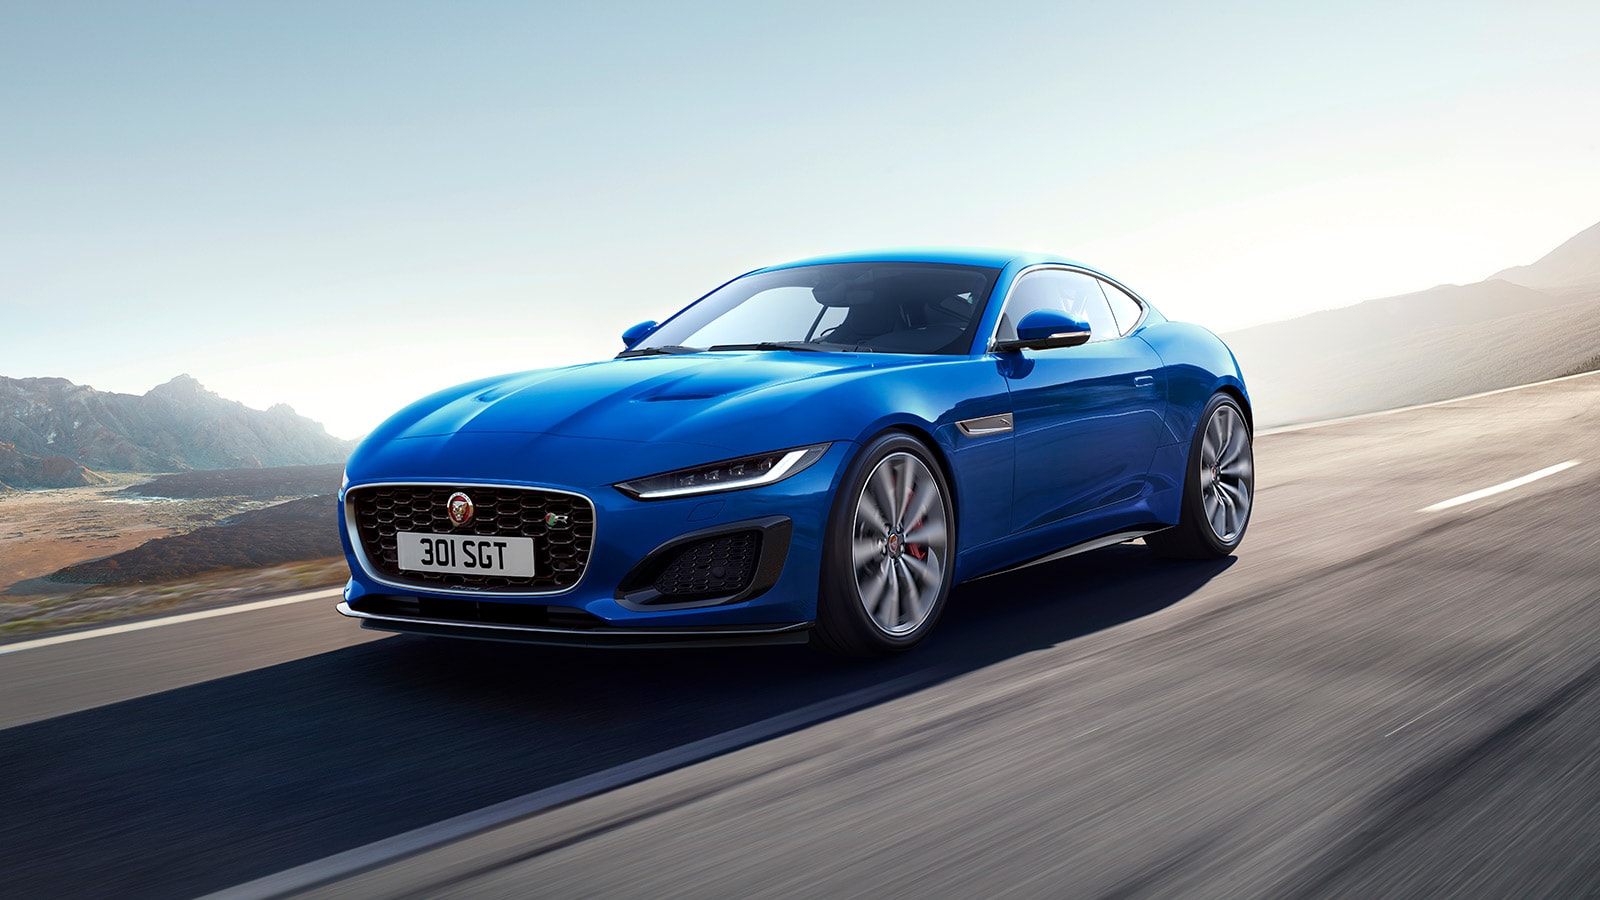 2021 Jaguar F Type Facelift Prices In India Start At Rs 95 12